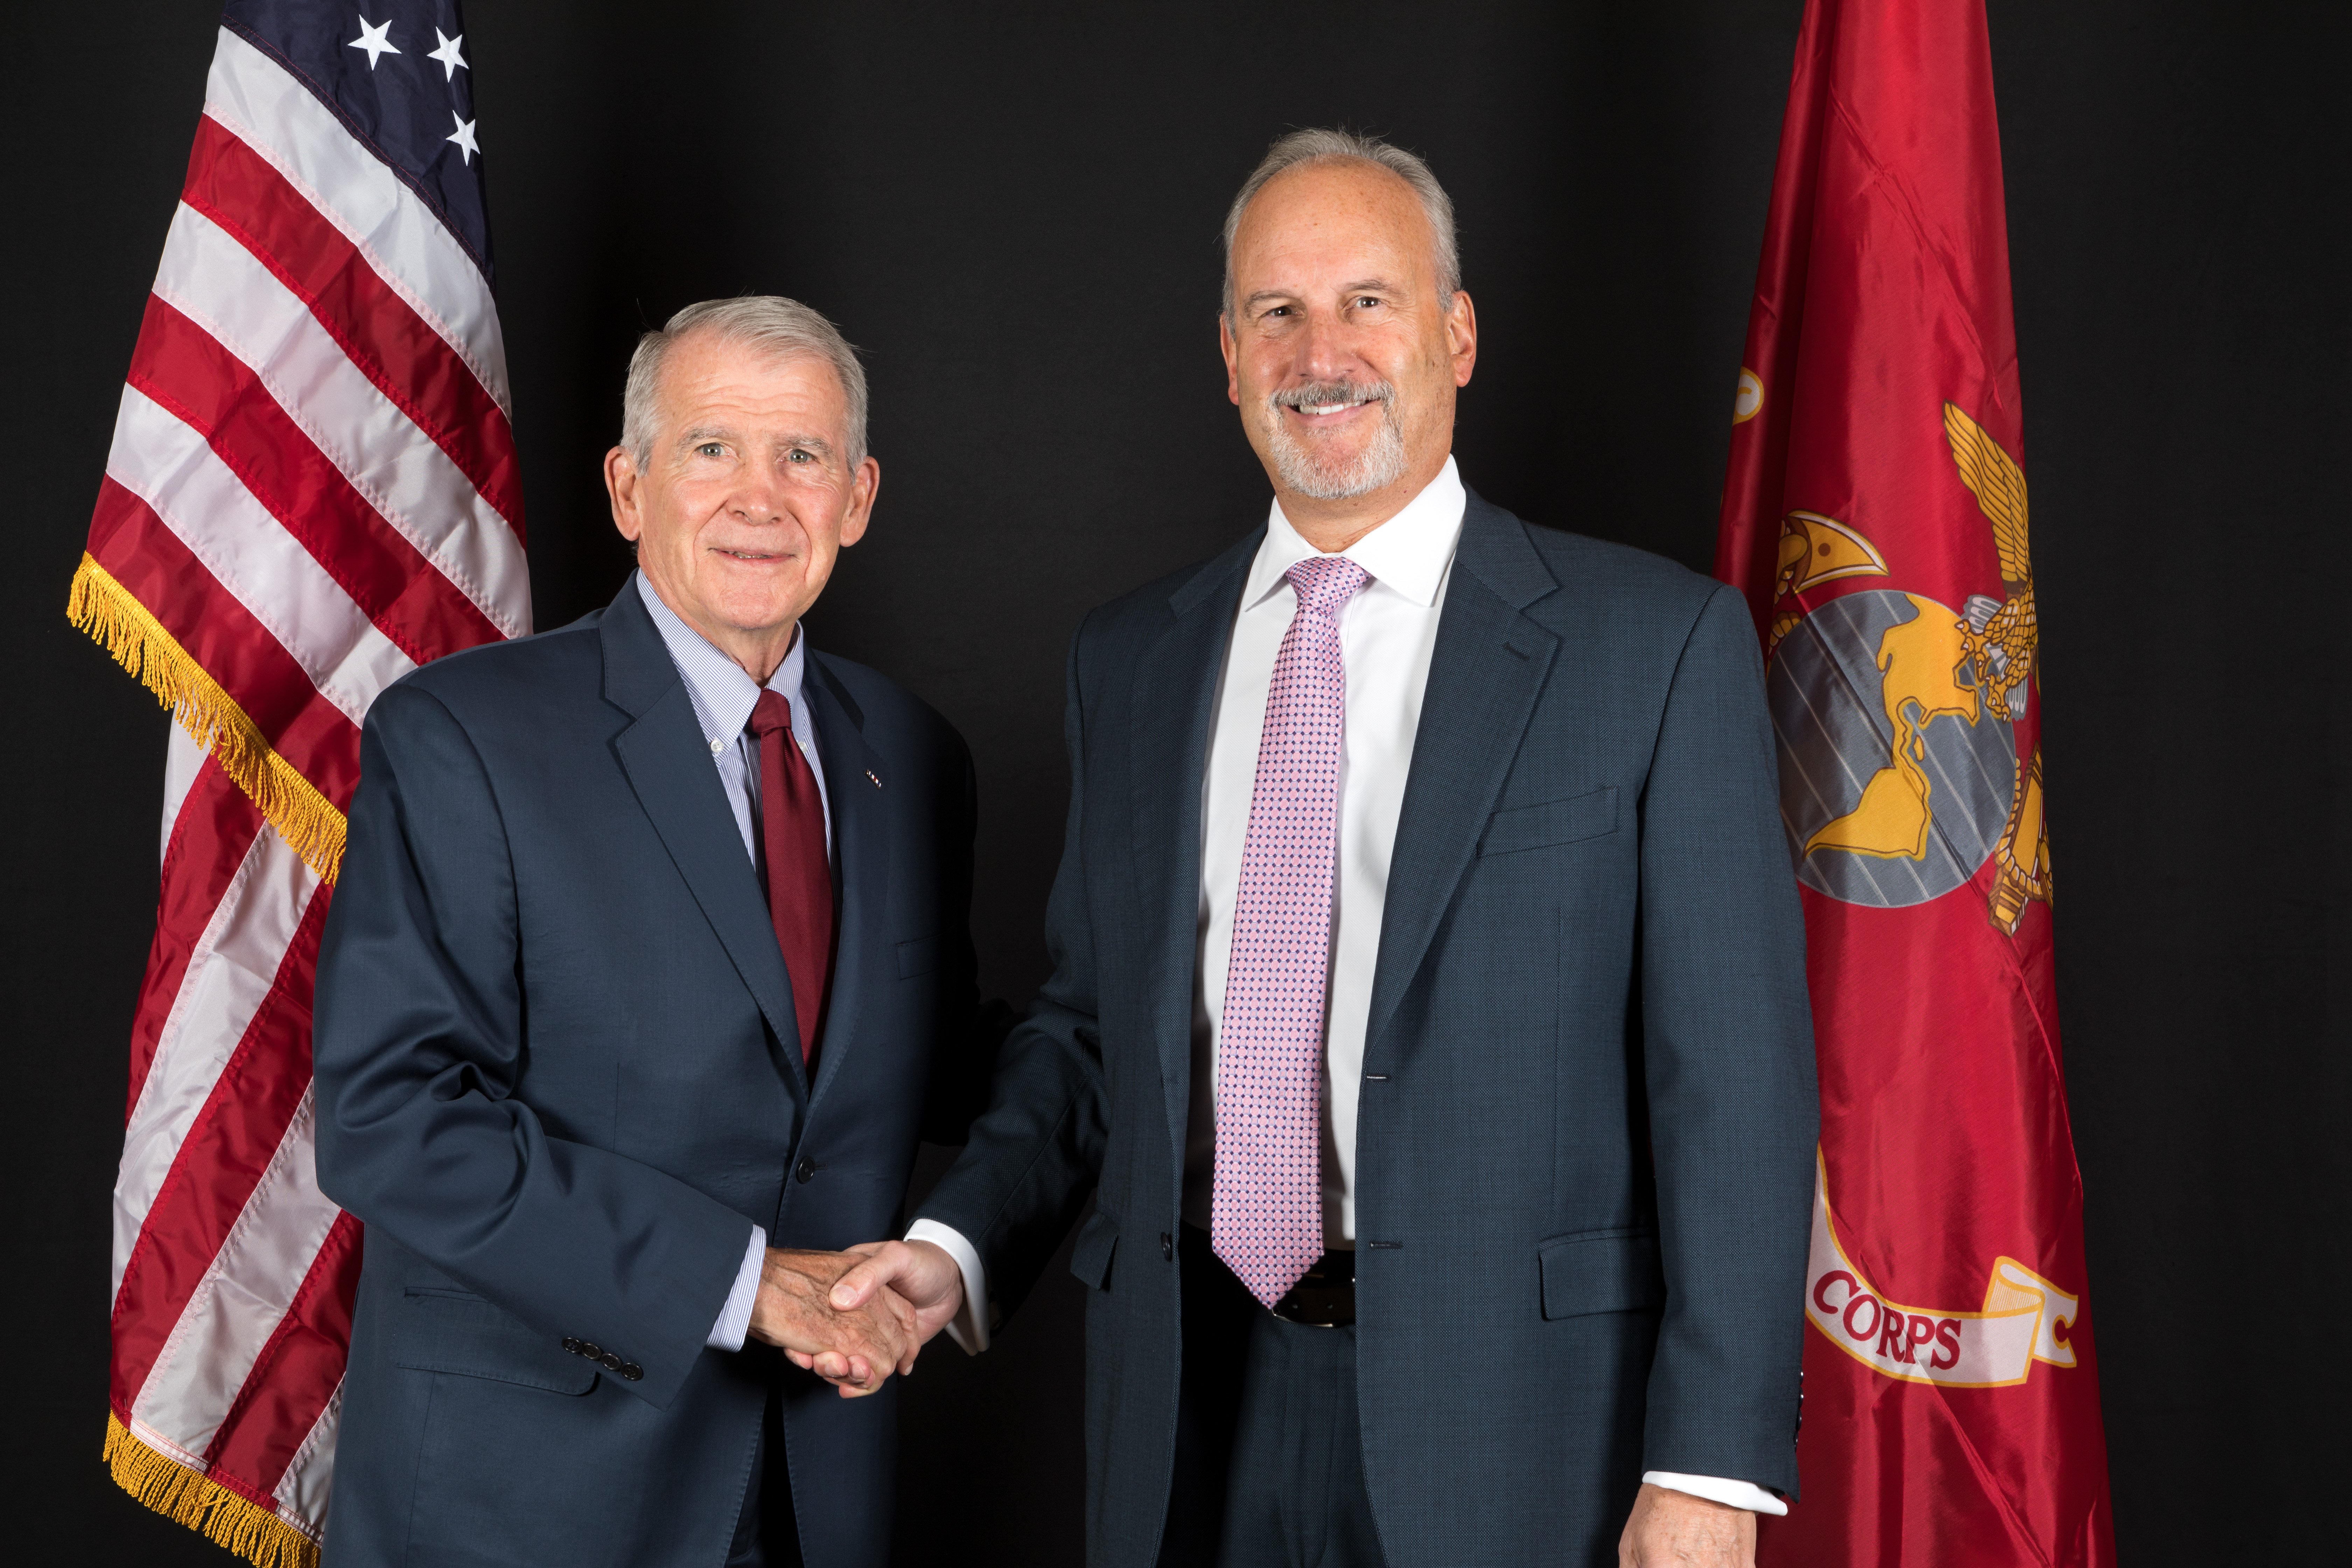 Lt. Col. Oliver North and Mike Gibbs